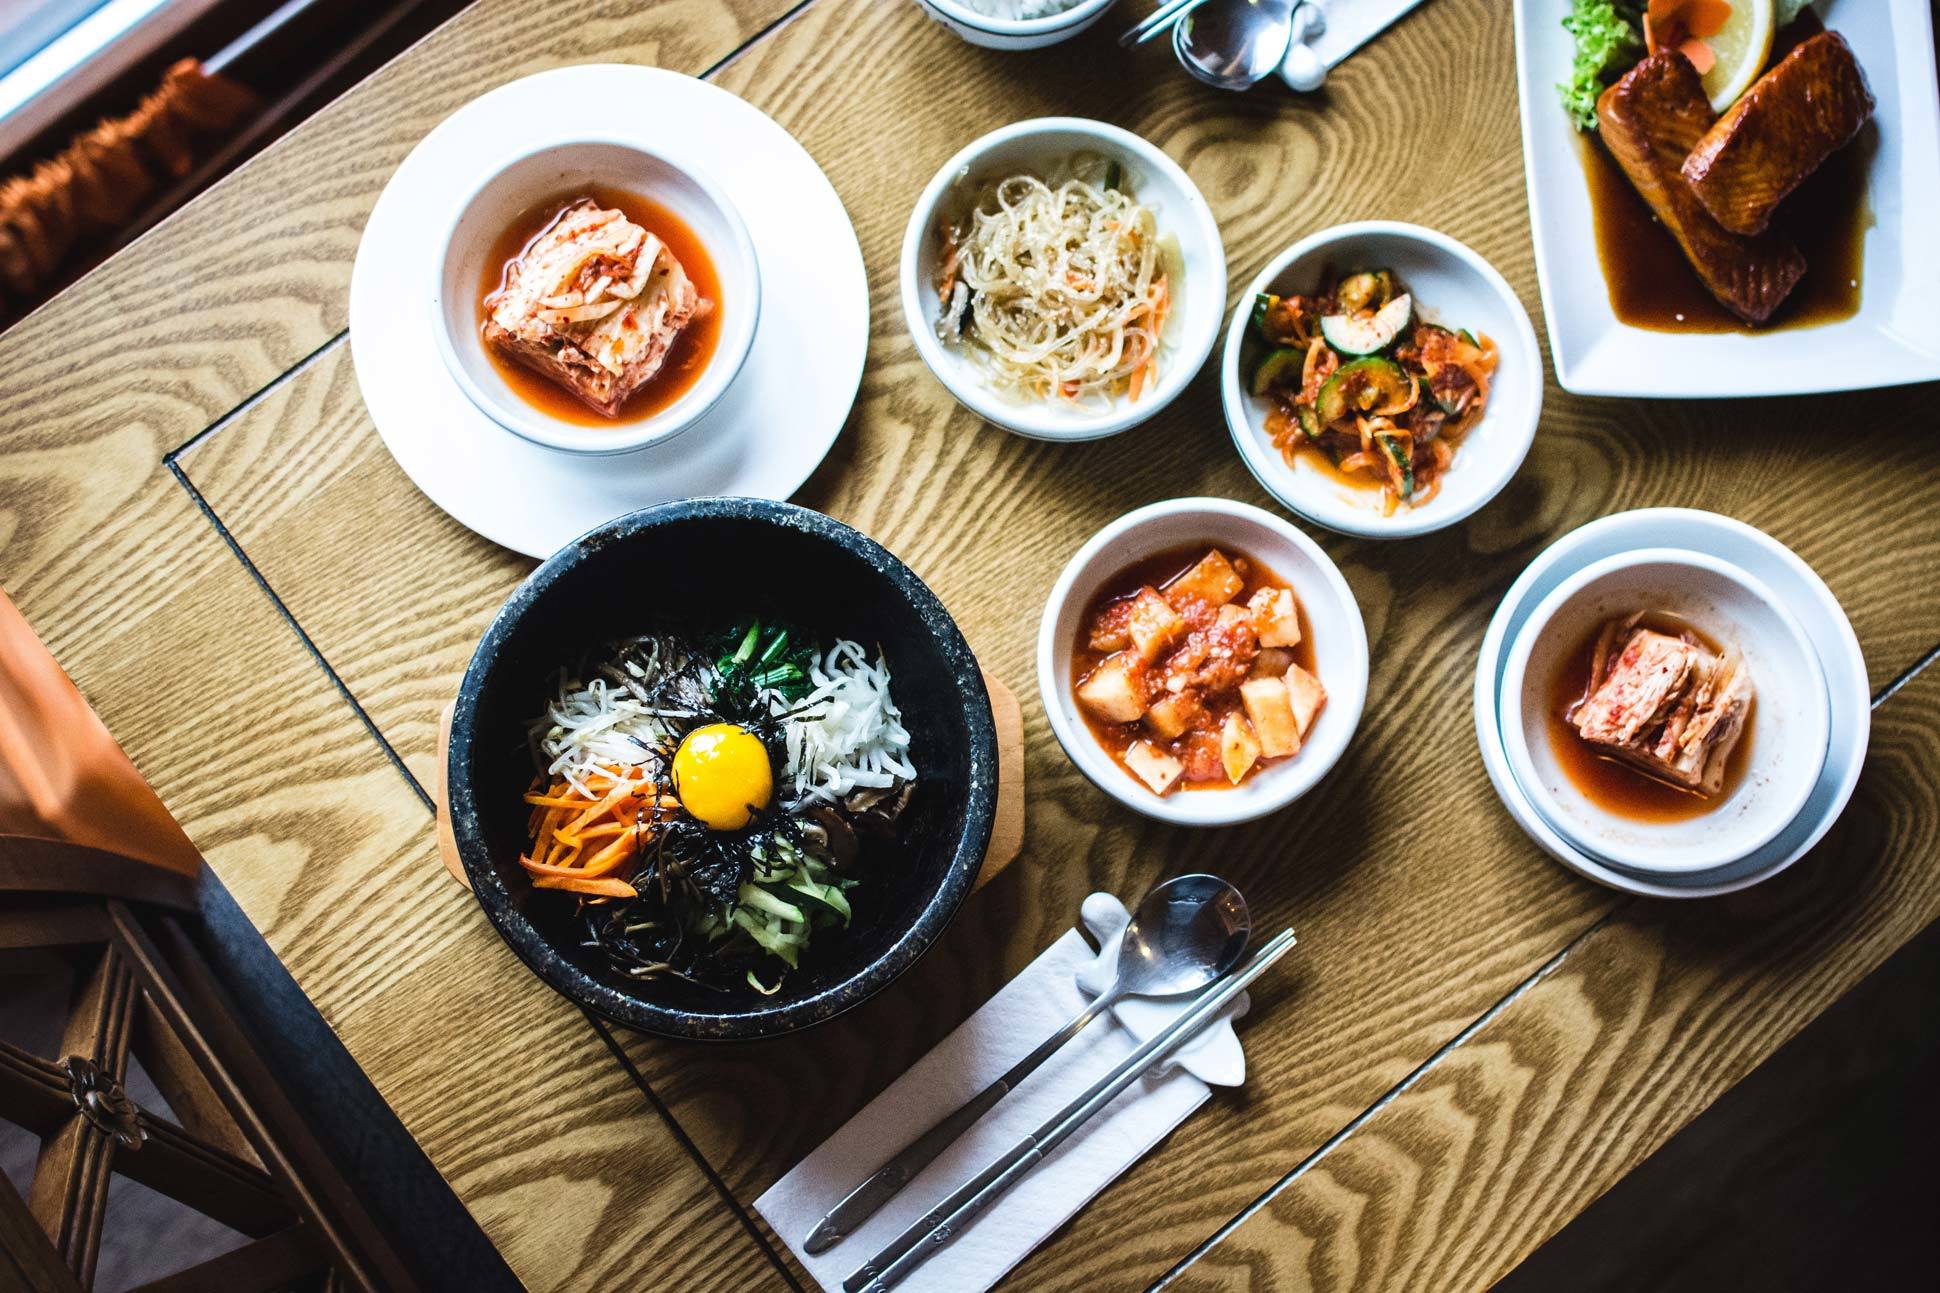 S1E5 The History of Kimchee (Kimchi) & What To Eat In Seoul, Korea